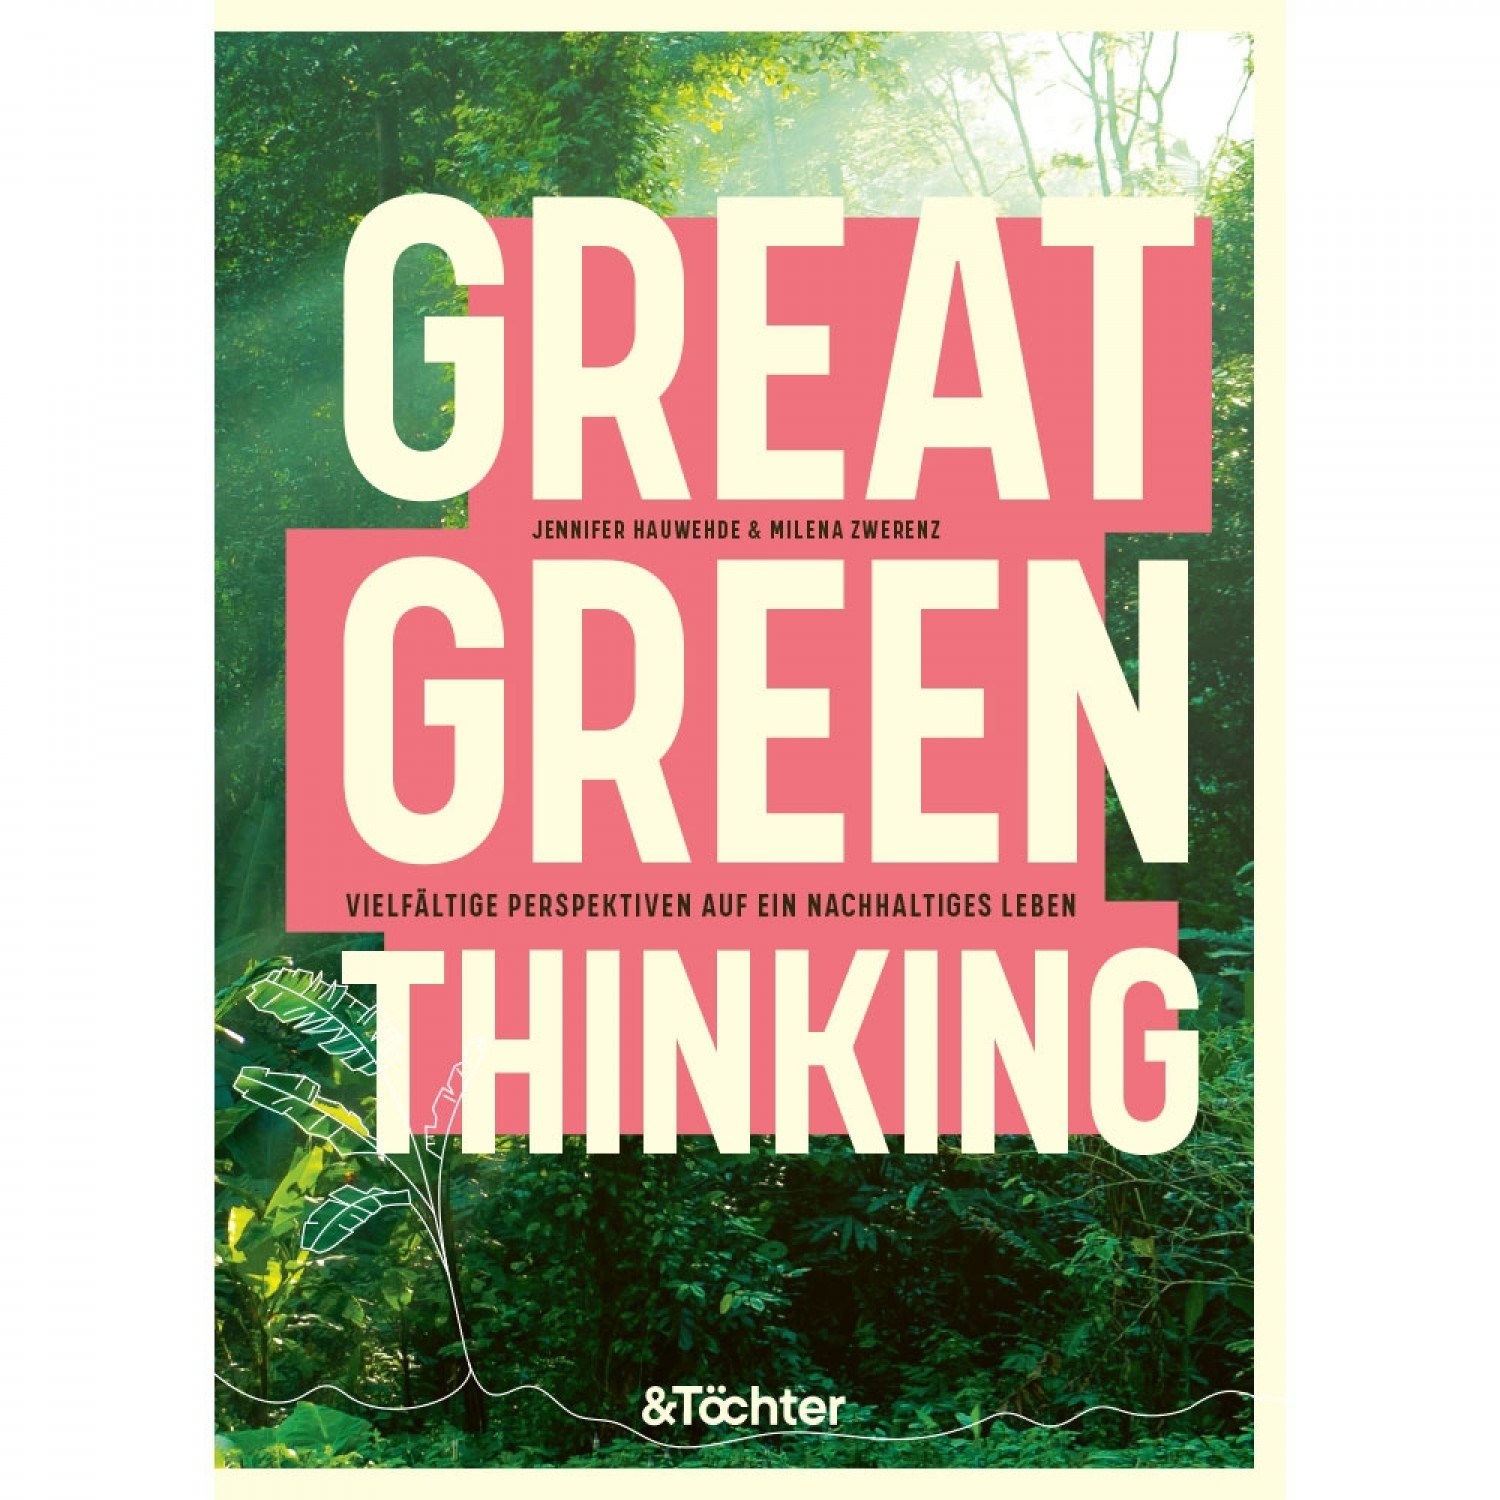 GREAT GREEN THINKING &Toechter publisher